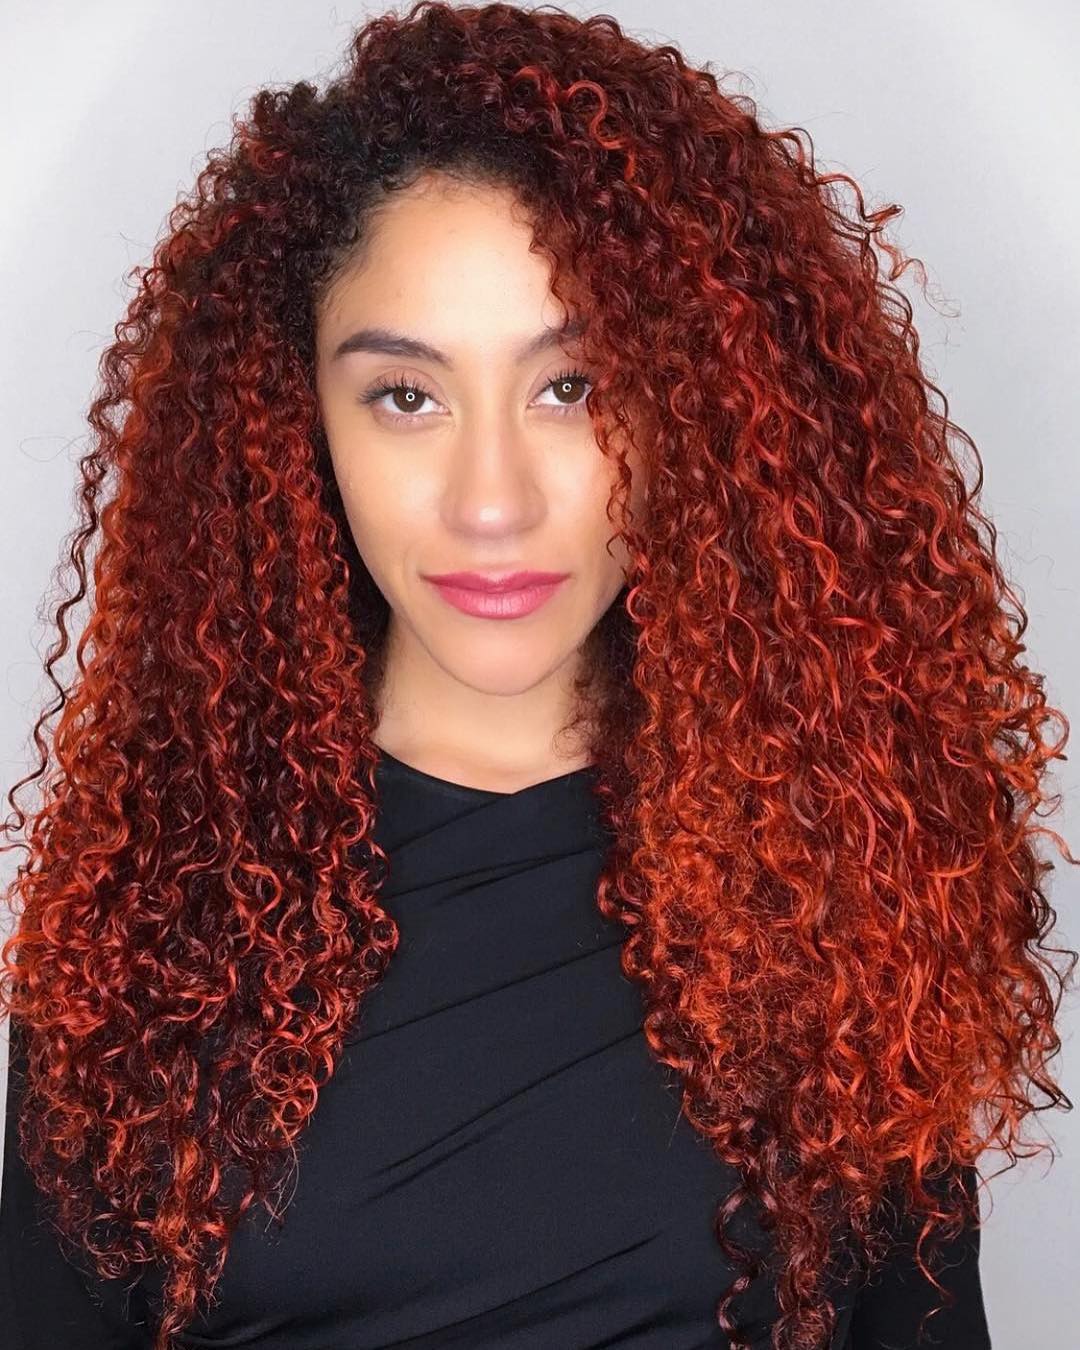 Long Curly Red Hairstyle